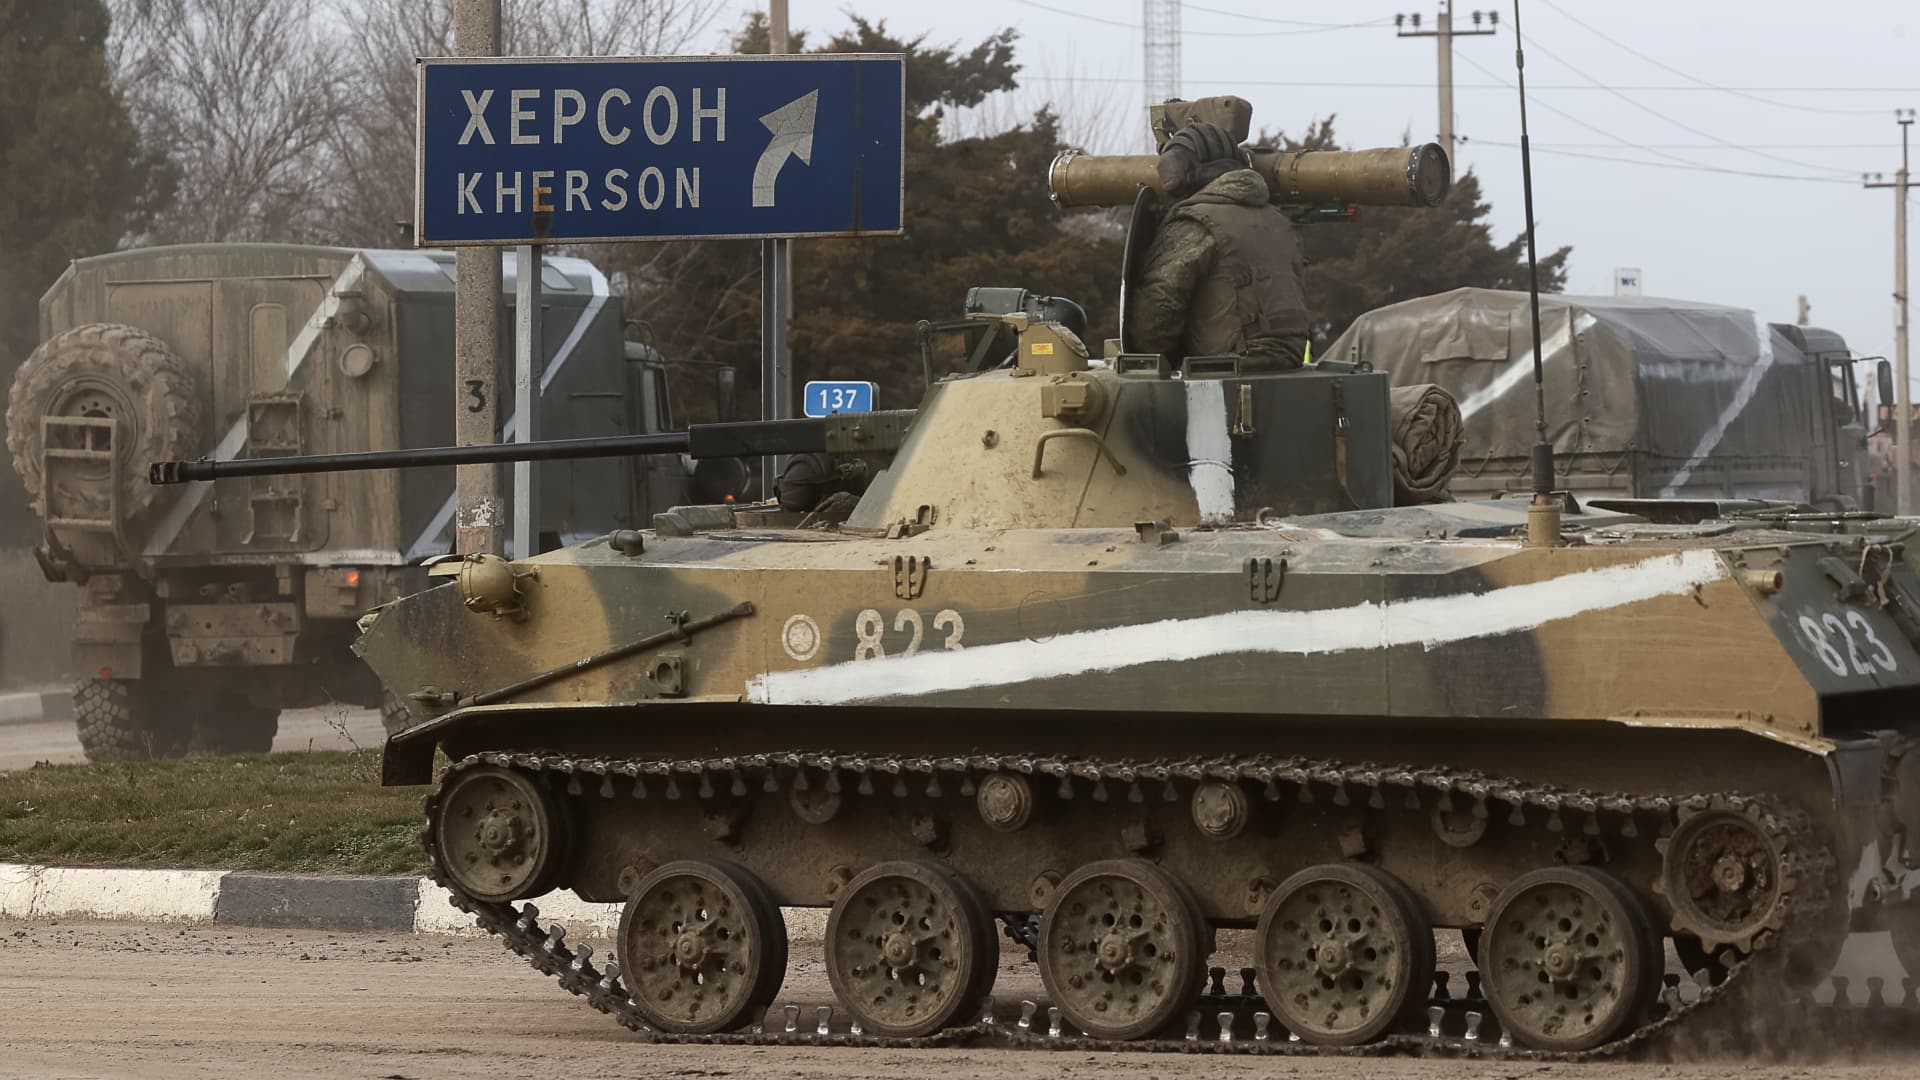 Armoured vehicles move across the town of Armyansk, northern Crimea. Early on February 24, President Putin announced a special military operation to be conducted by the Russian Armed Forces in response to appeals for help from the leaders of the Donetsk and Lugansk People's Republics.